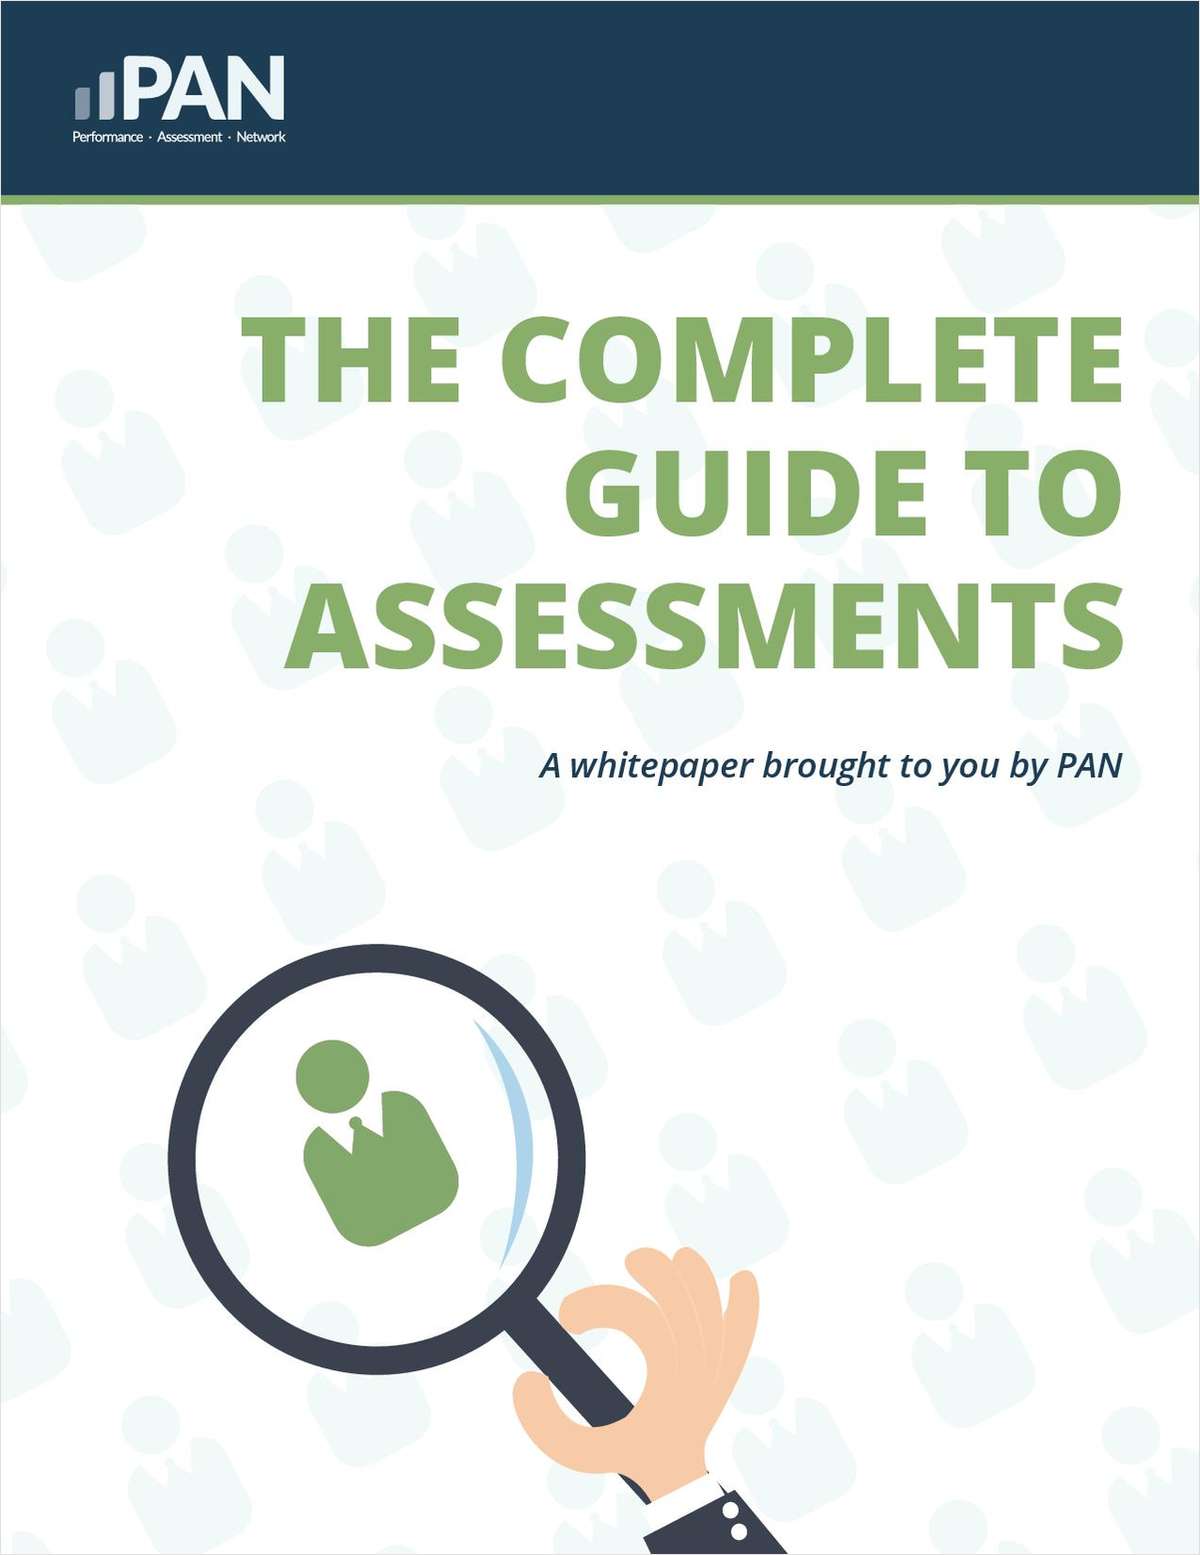 The Complete Guide to Assessments